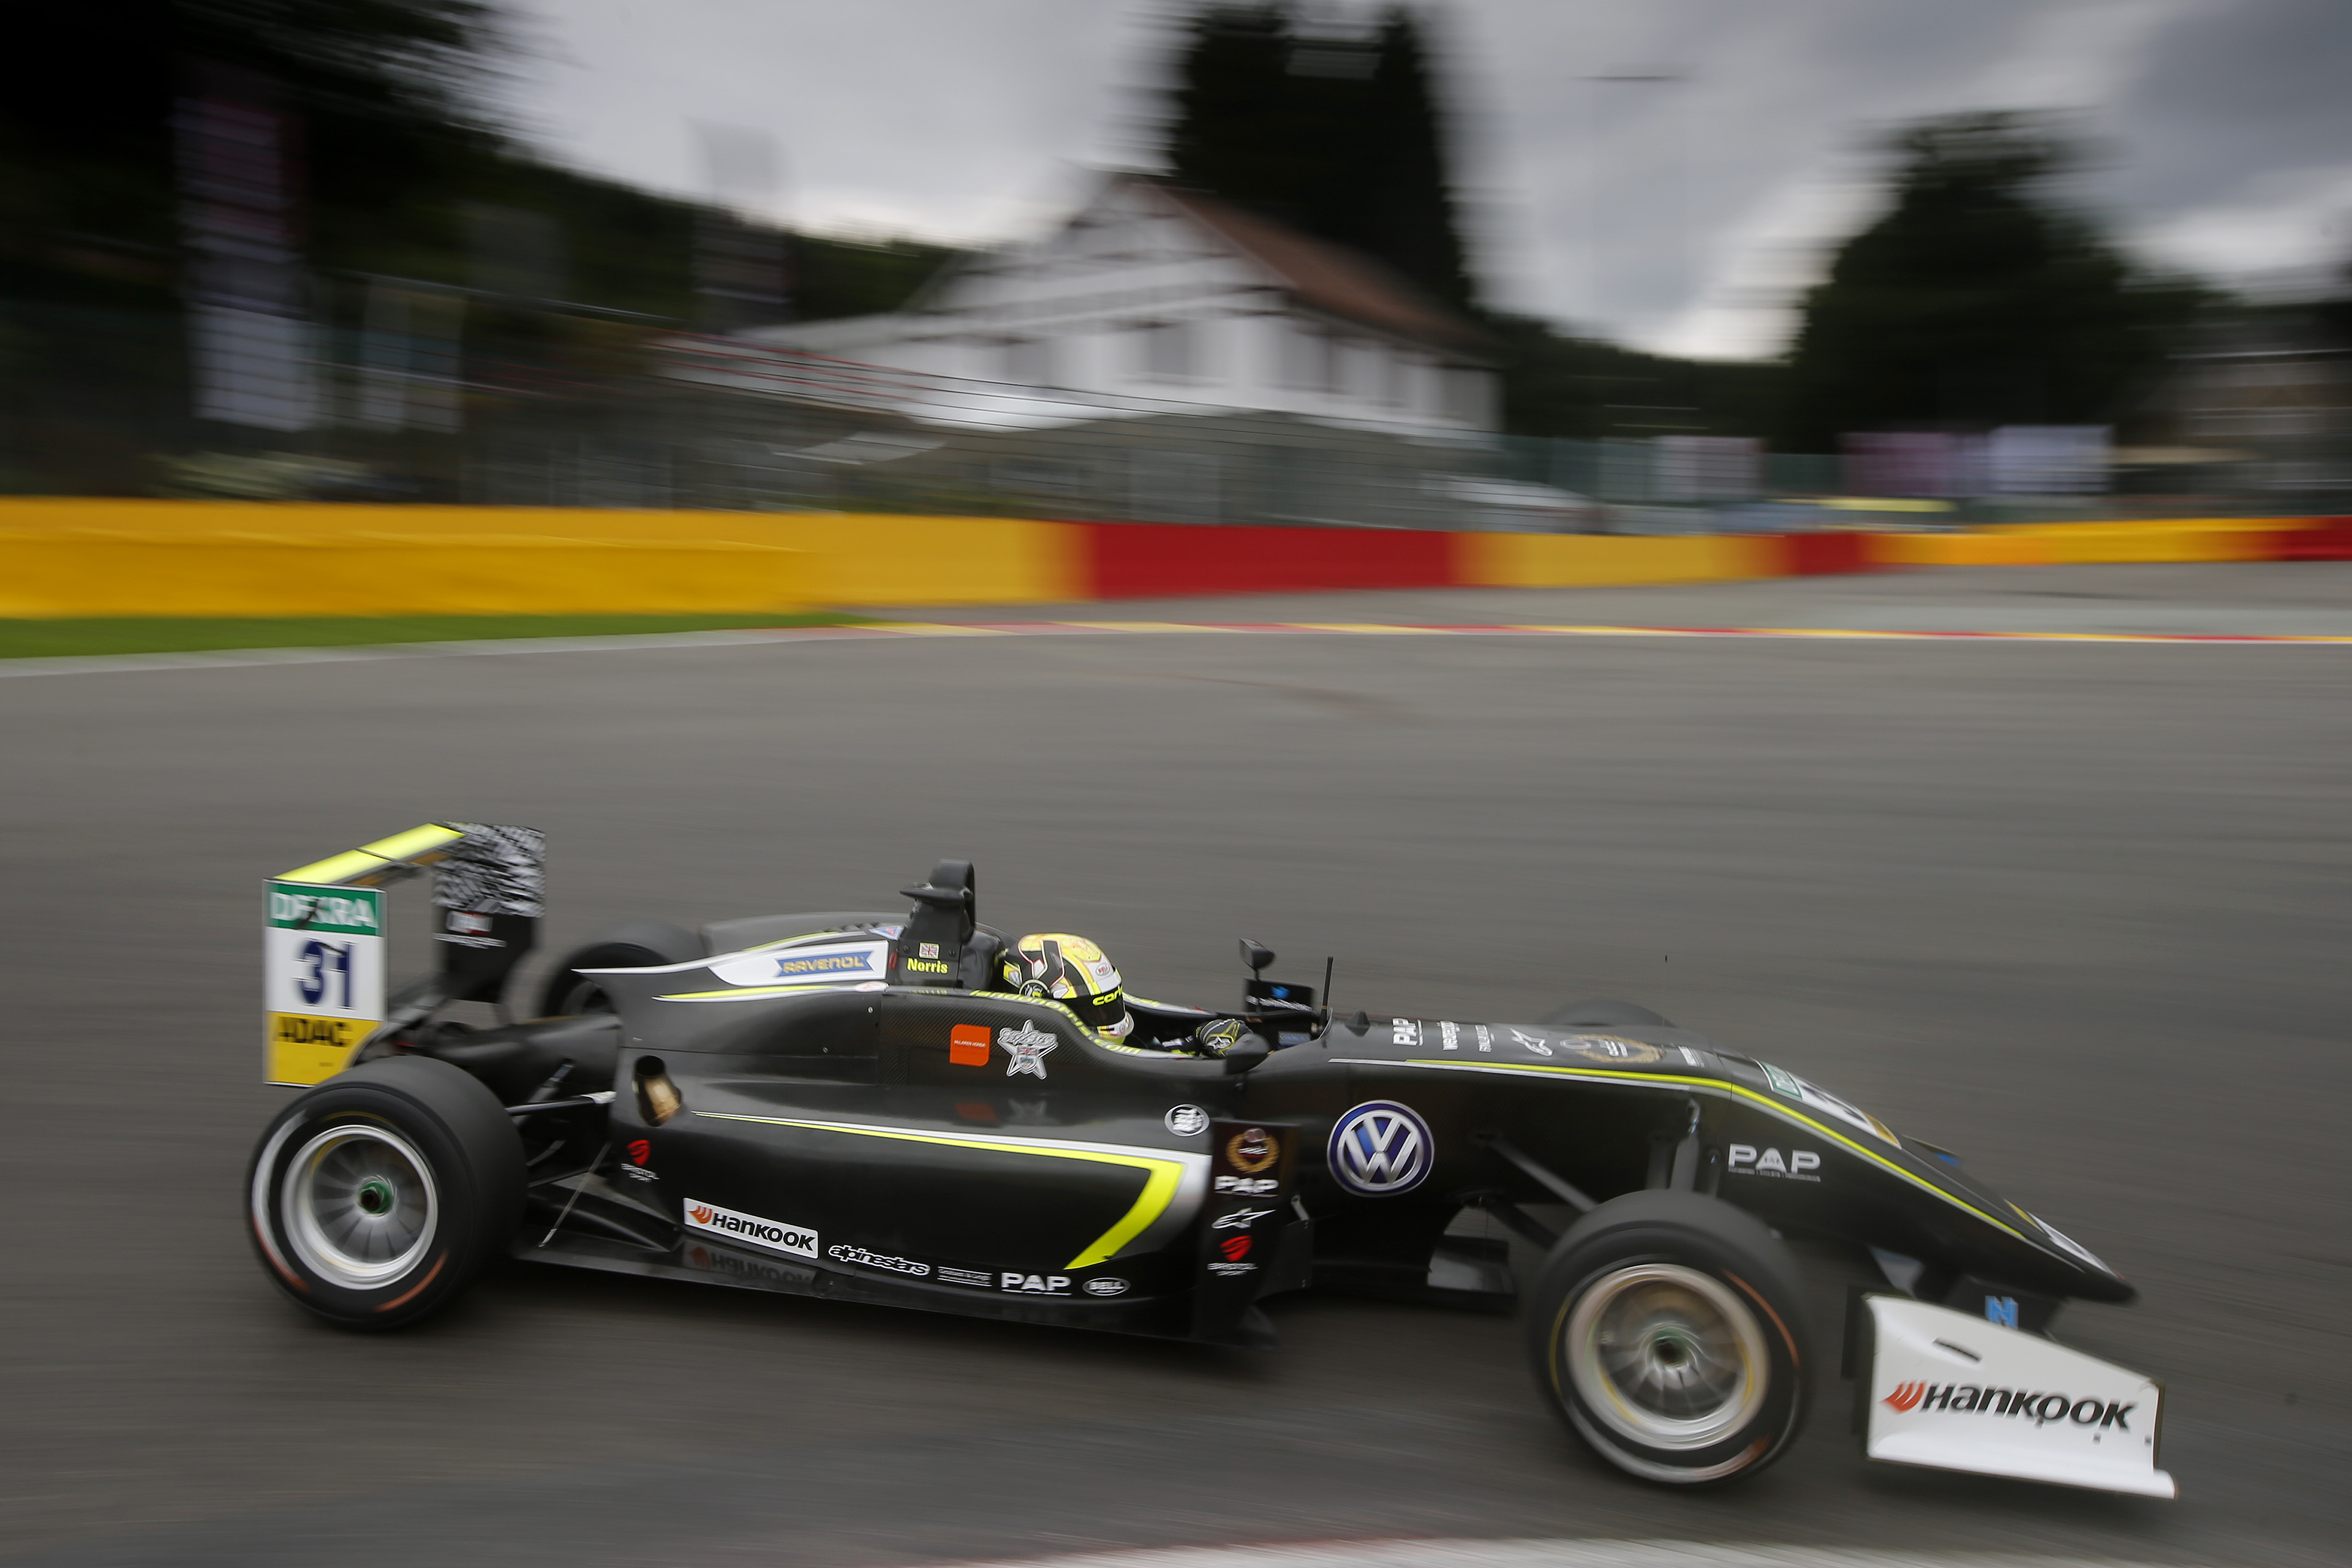 F3 Lando Norris Claims All Three Pole Positions At Spa Francorchamps Federation Internationale De L Automobile